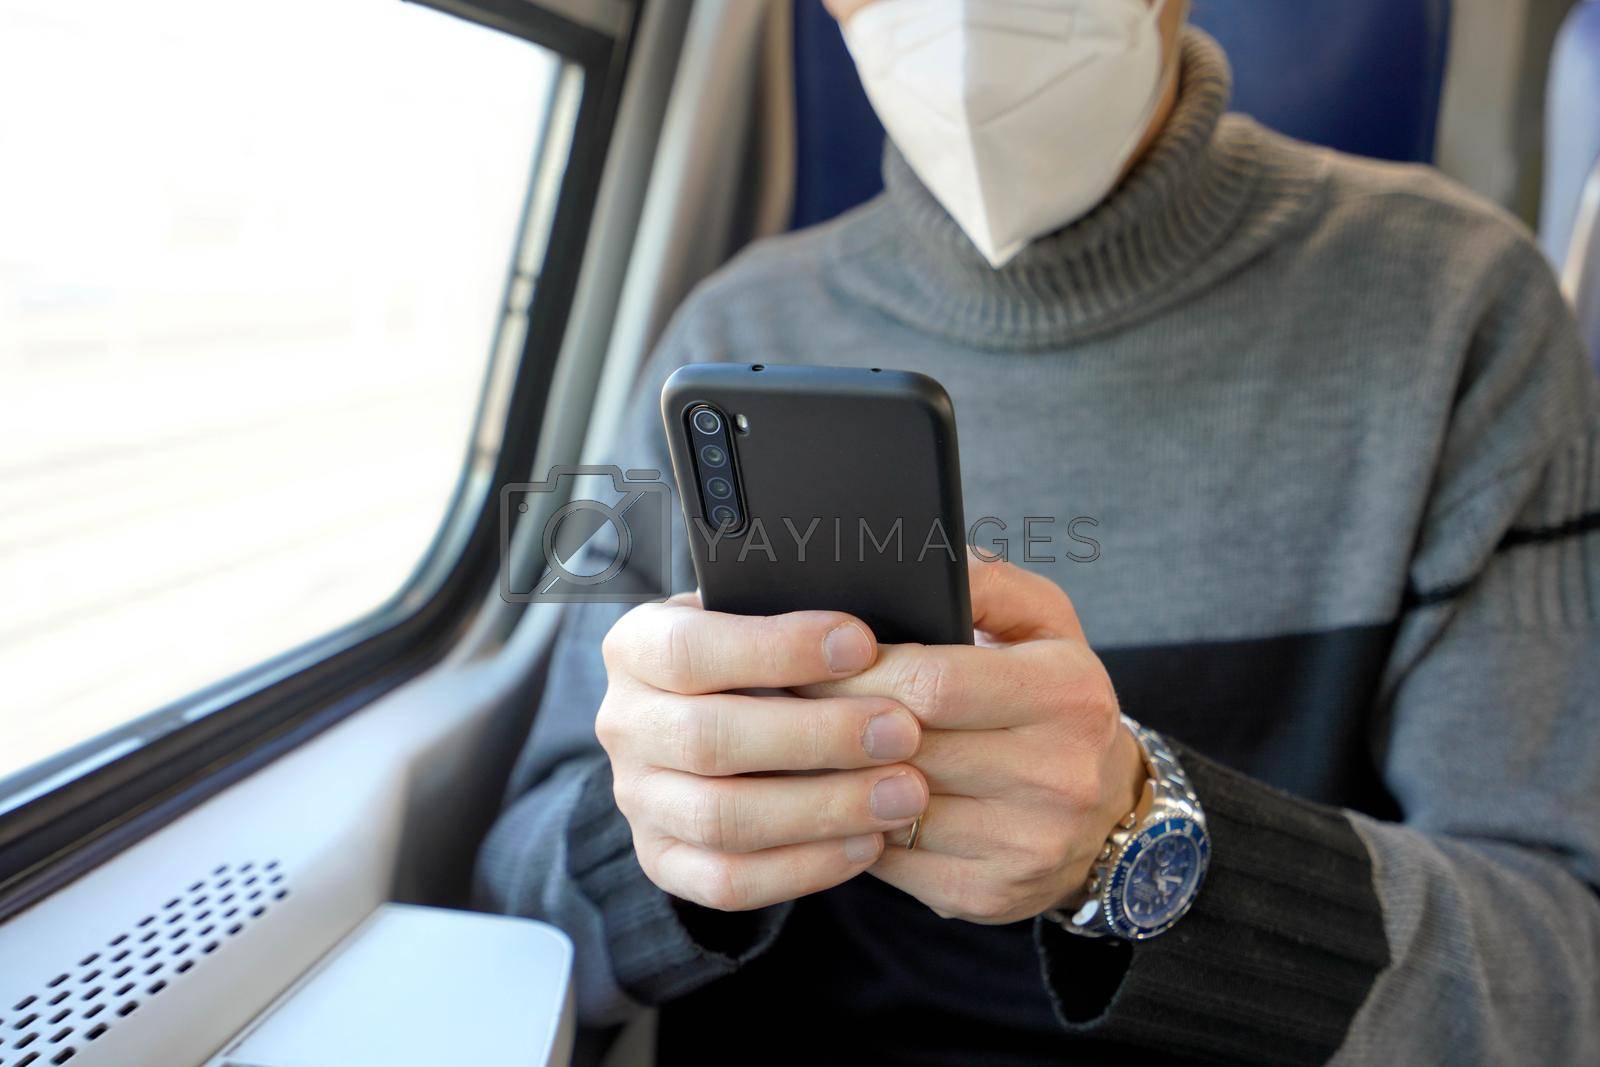 Man on public transport using mobile app wearing medical face mask. Train commuter holding cellphone with mandatory protective mask KN95 FFP2. Focus on the phone.